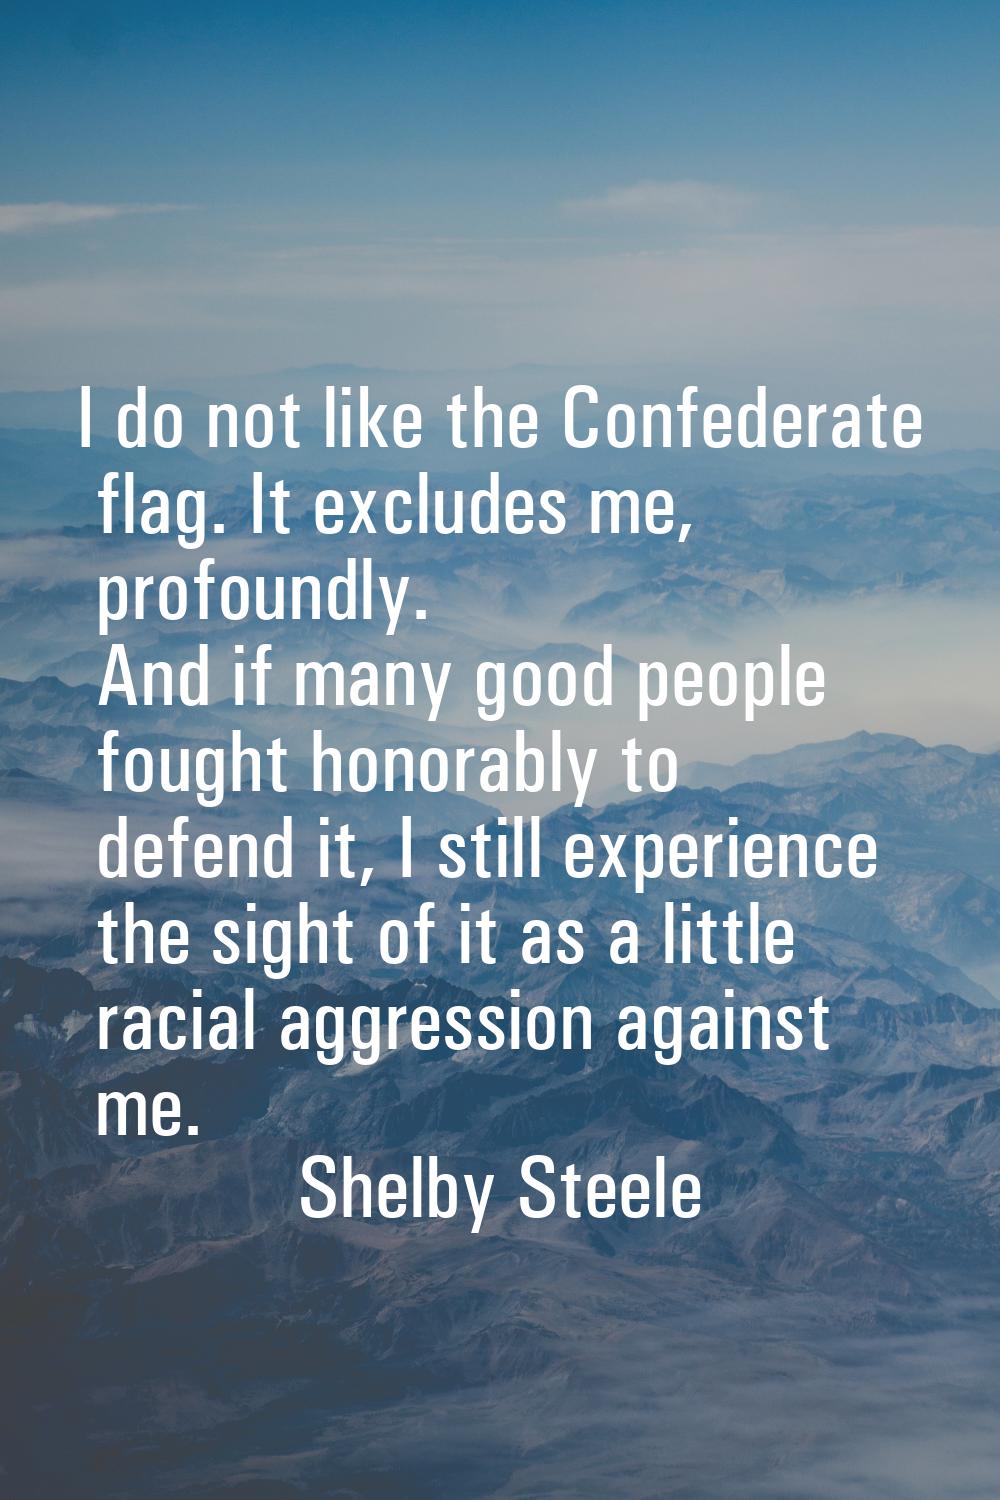 I do not like the Confederate flag. It excludes me, profoundly. And if many good people fought hono